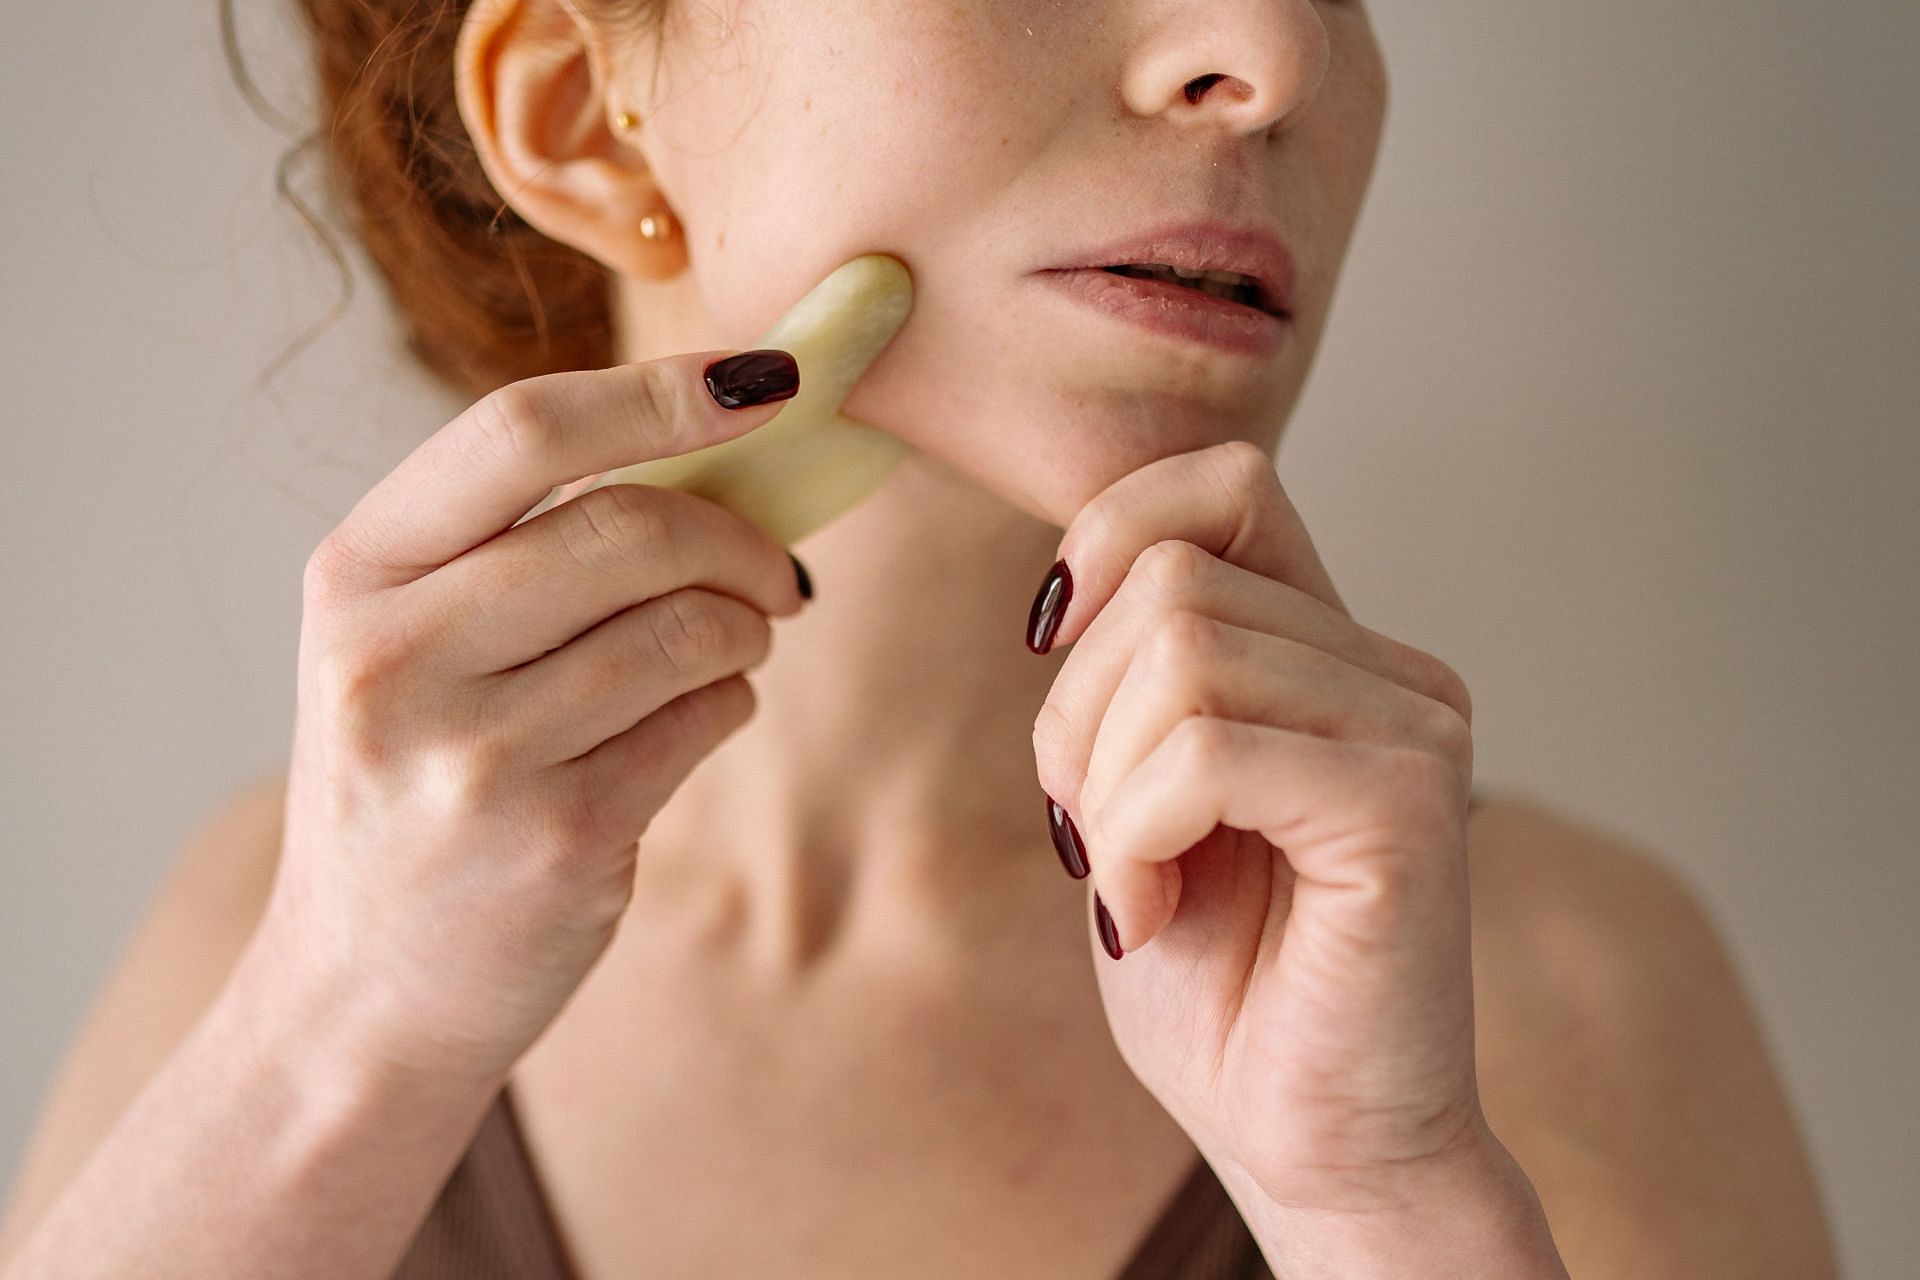 Gua Sha is a chinese facial scraping technique to reduce fine lines and wrinkles. (Image via Pexels / Yan Krukov)